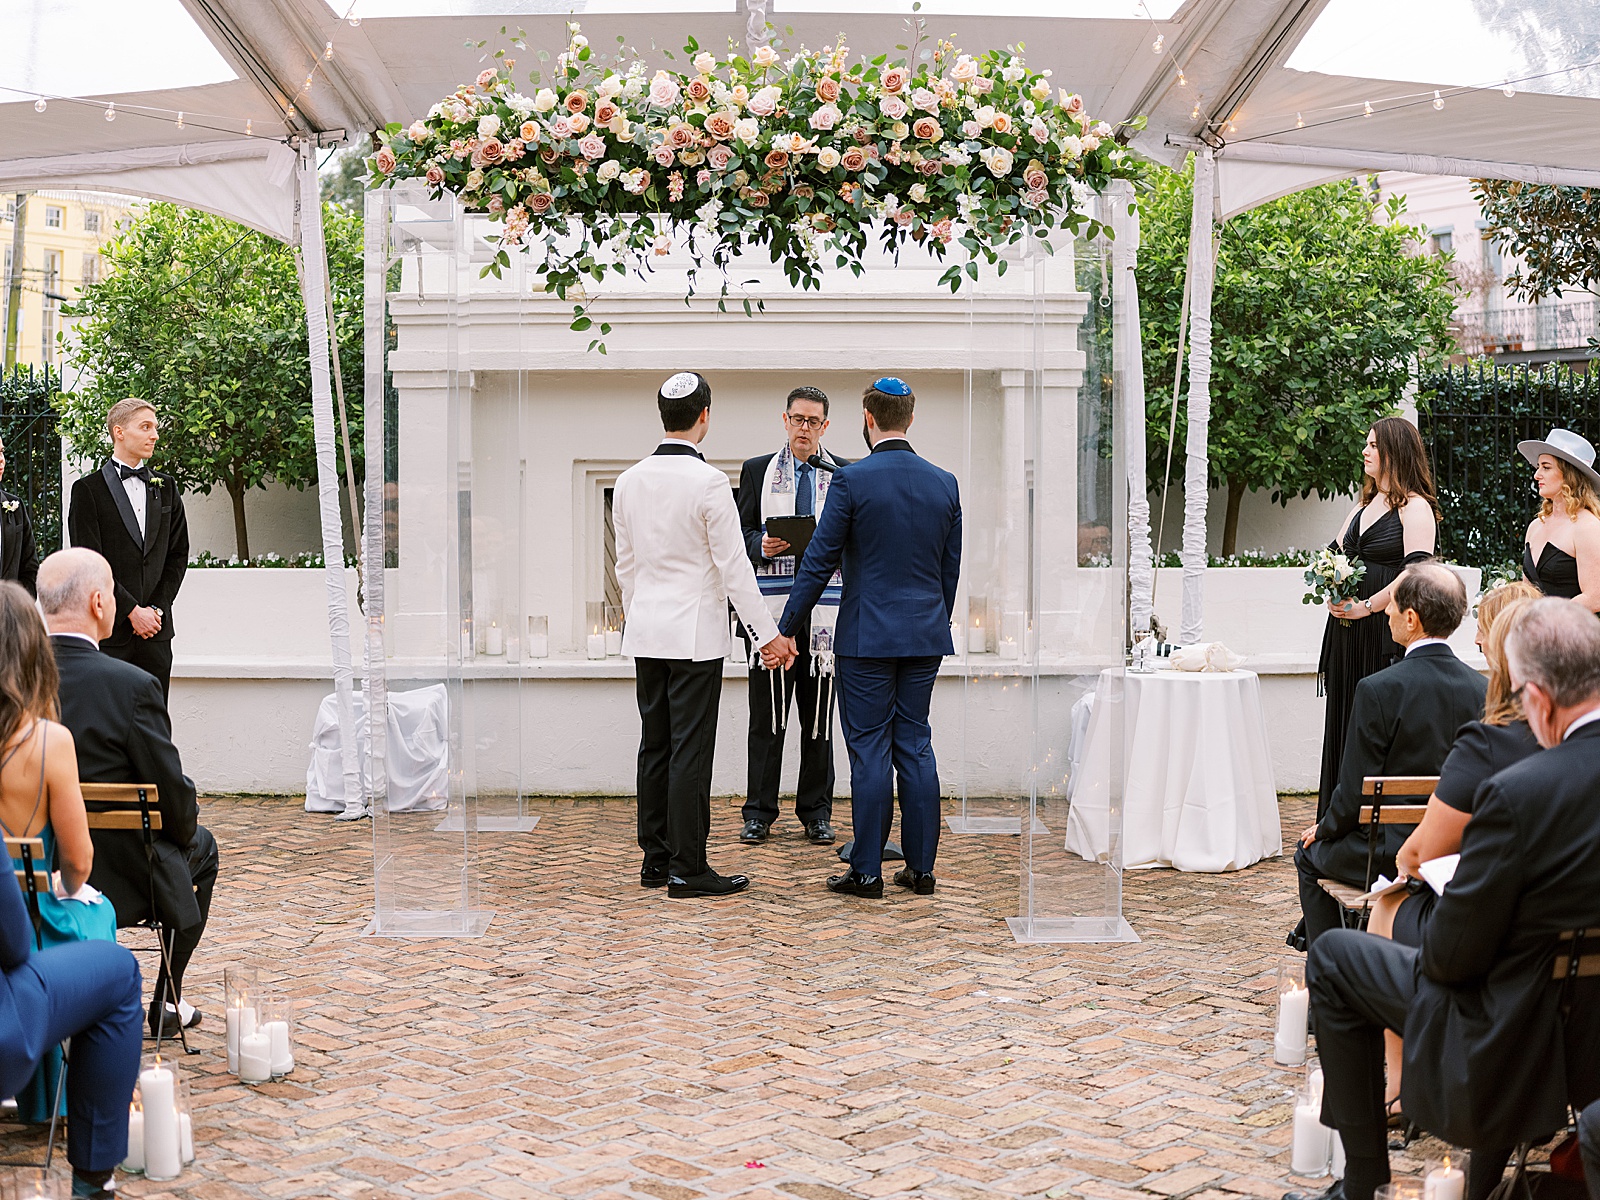 Two grooms hold hands under a floral chuppah at a wedding in a courtyard.